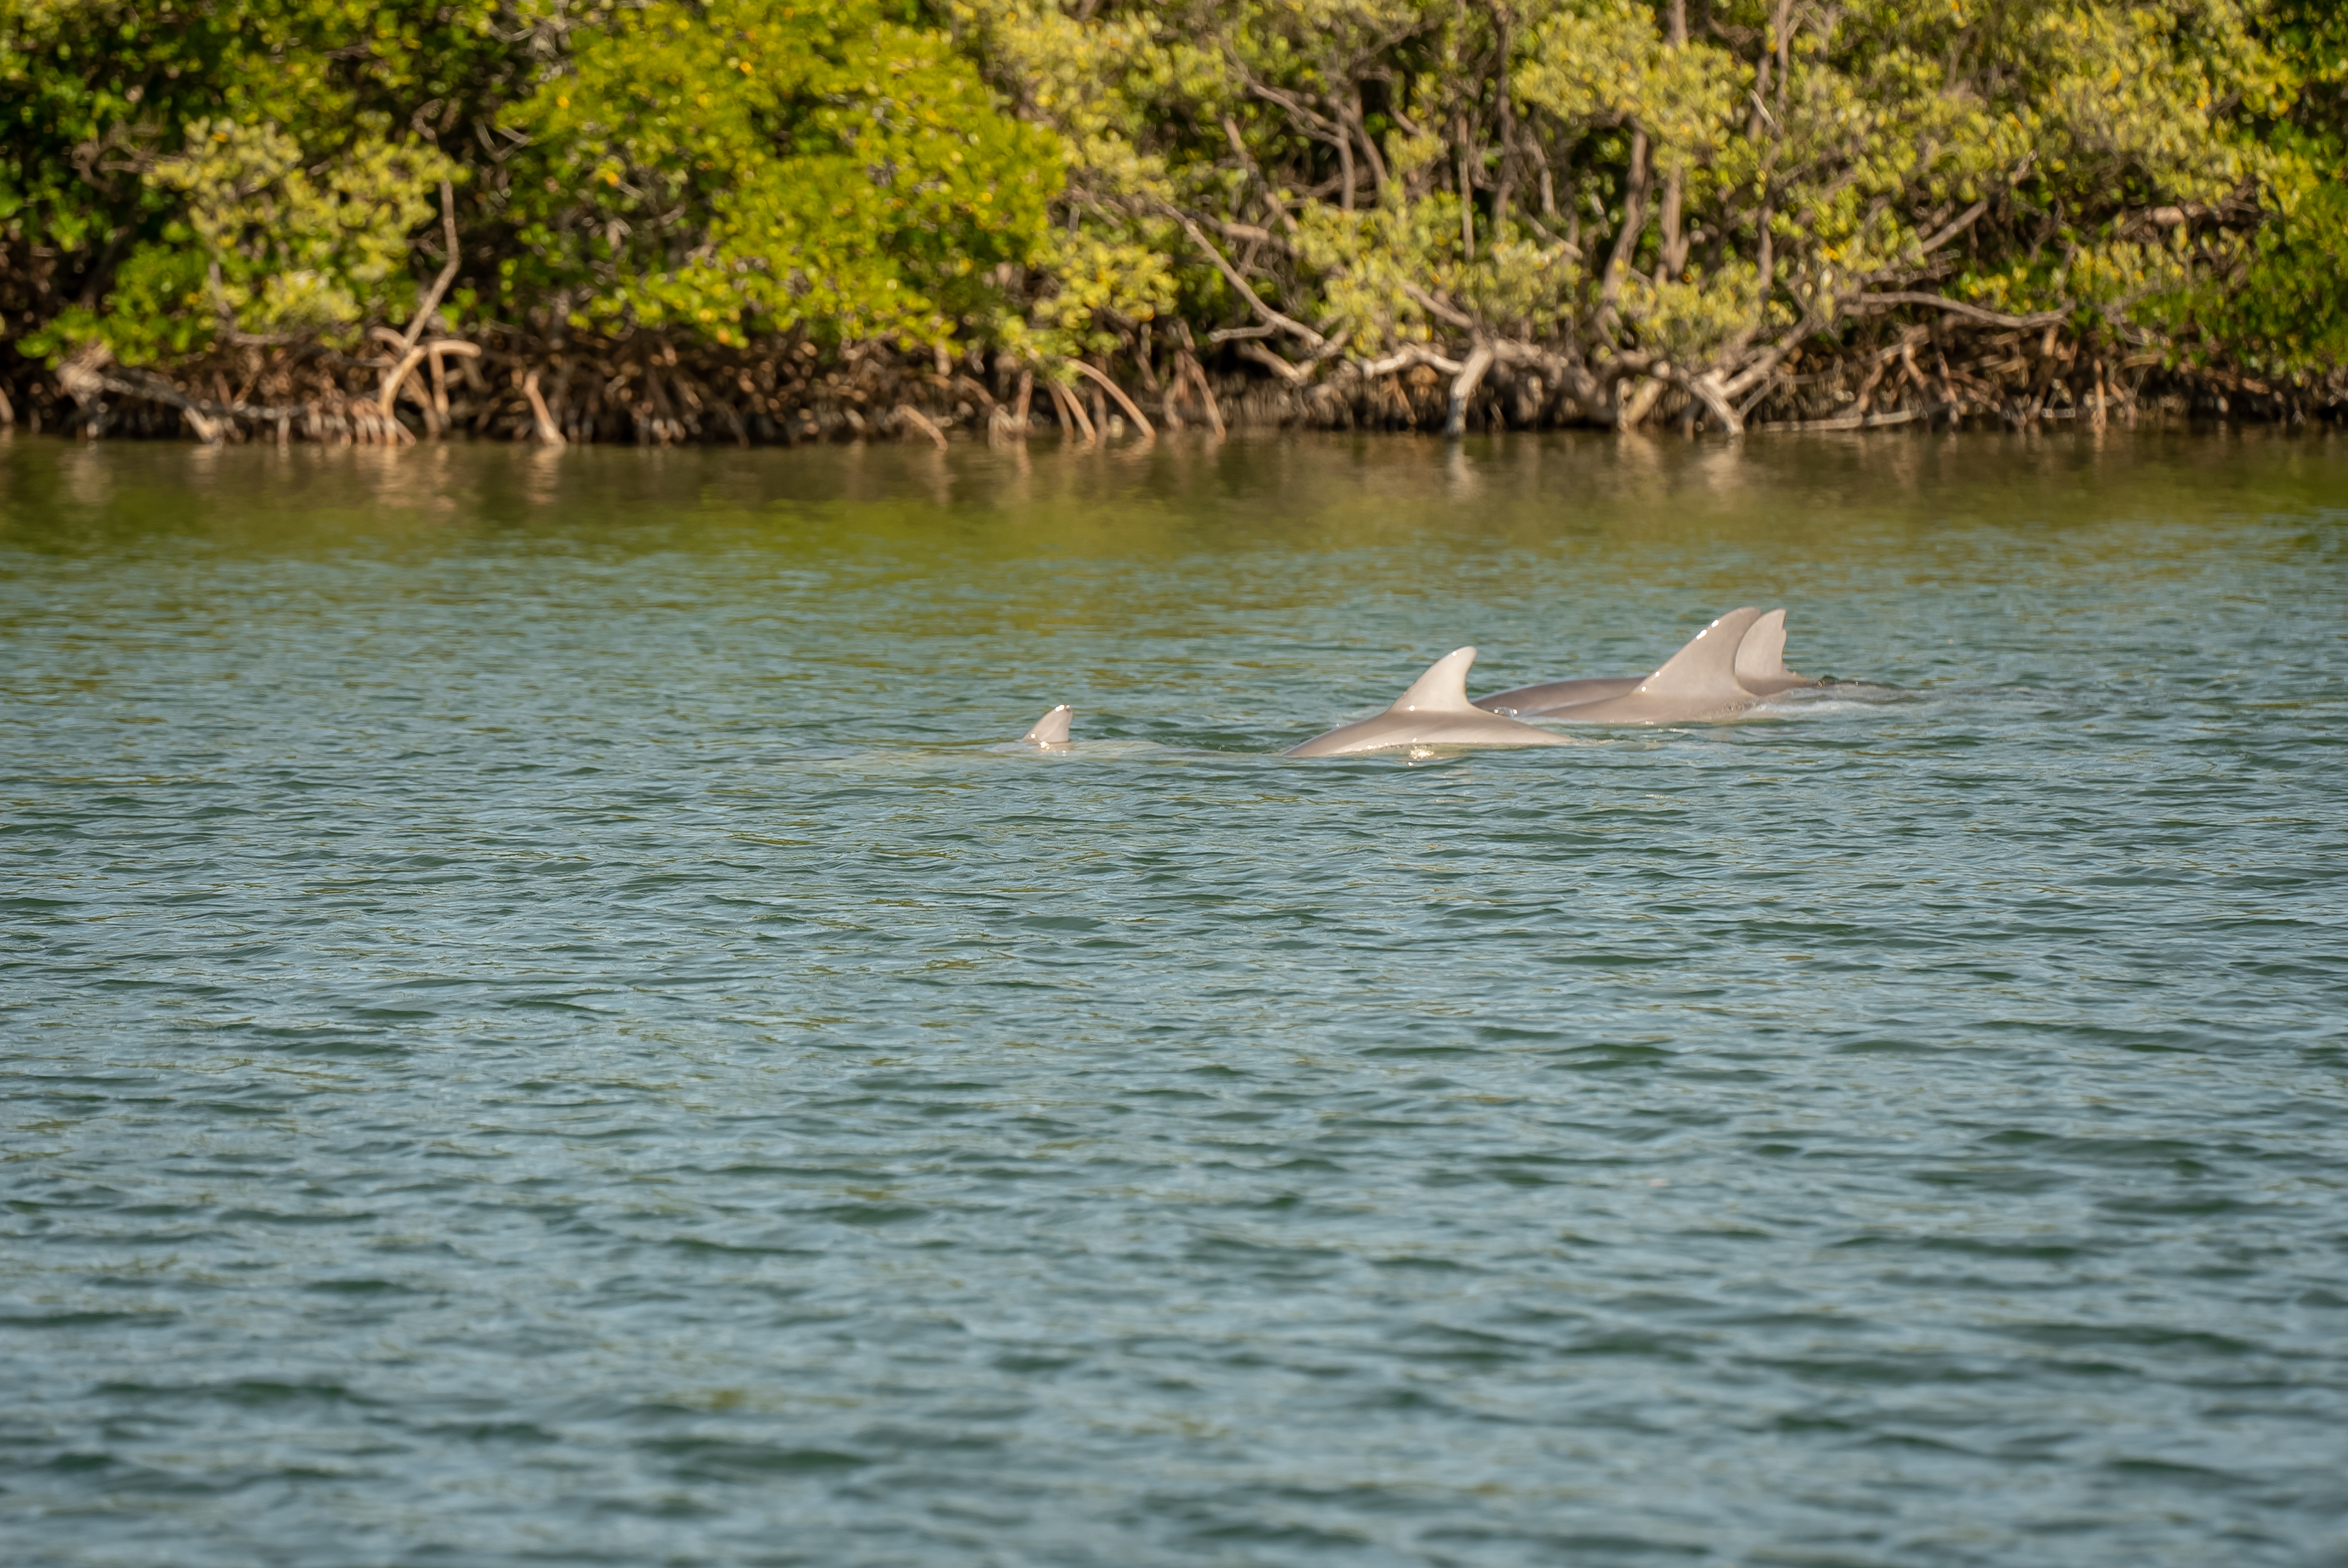 Travel the Indian River Lagoon in the comfort of a Discovery pontoon boat and explore the variety of species that call the lagoon home. Marine Discovery Center's Dolphin Cruise features a tour with a friendly certified Florida naturalists.